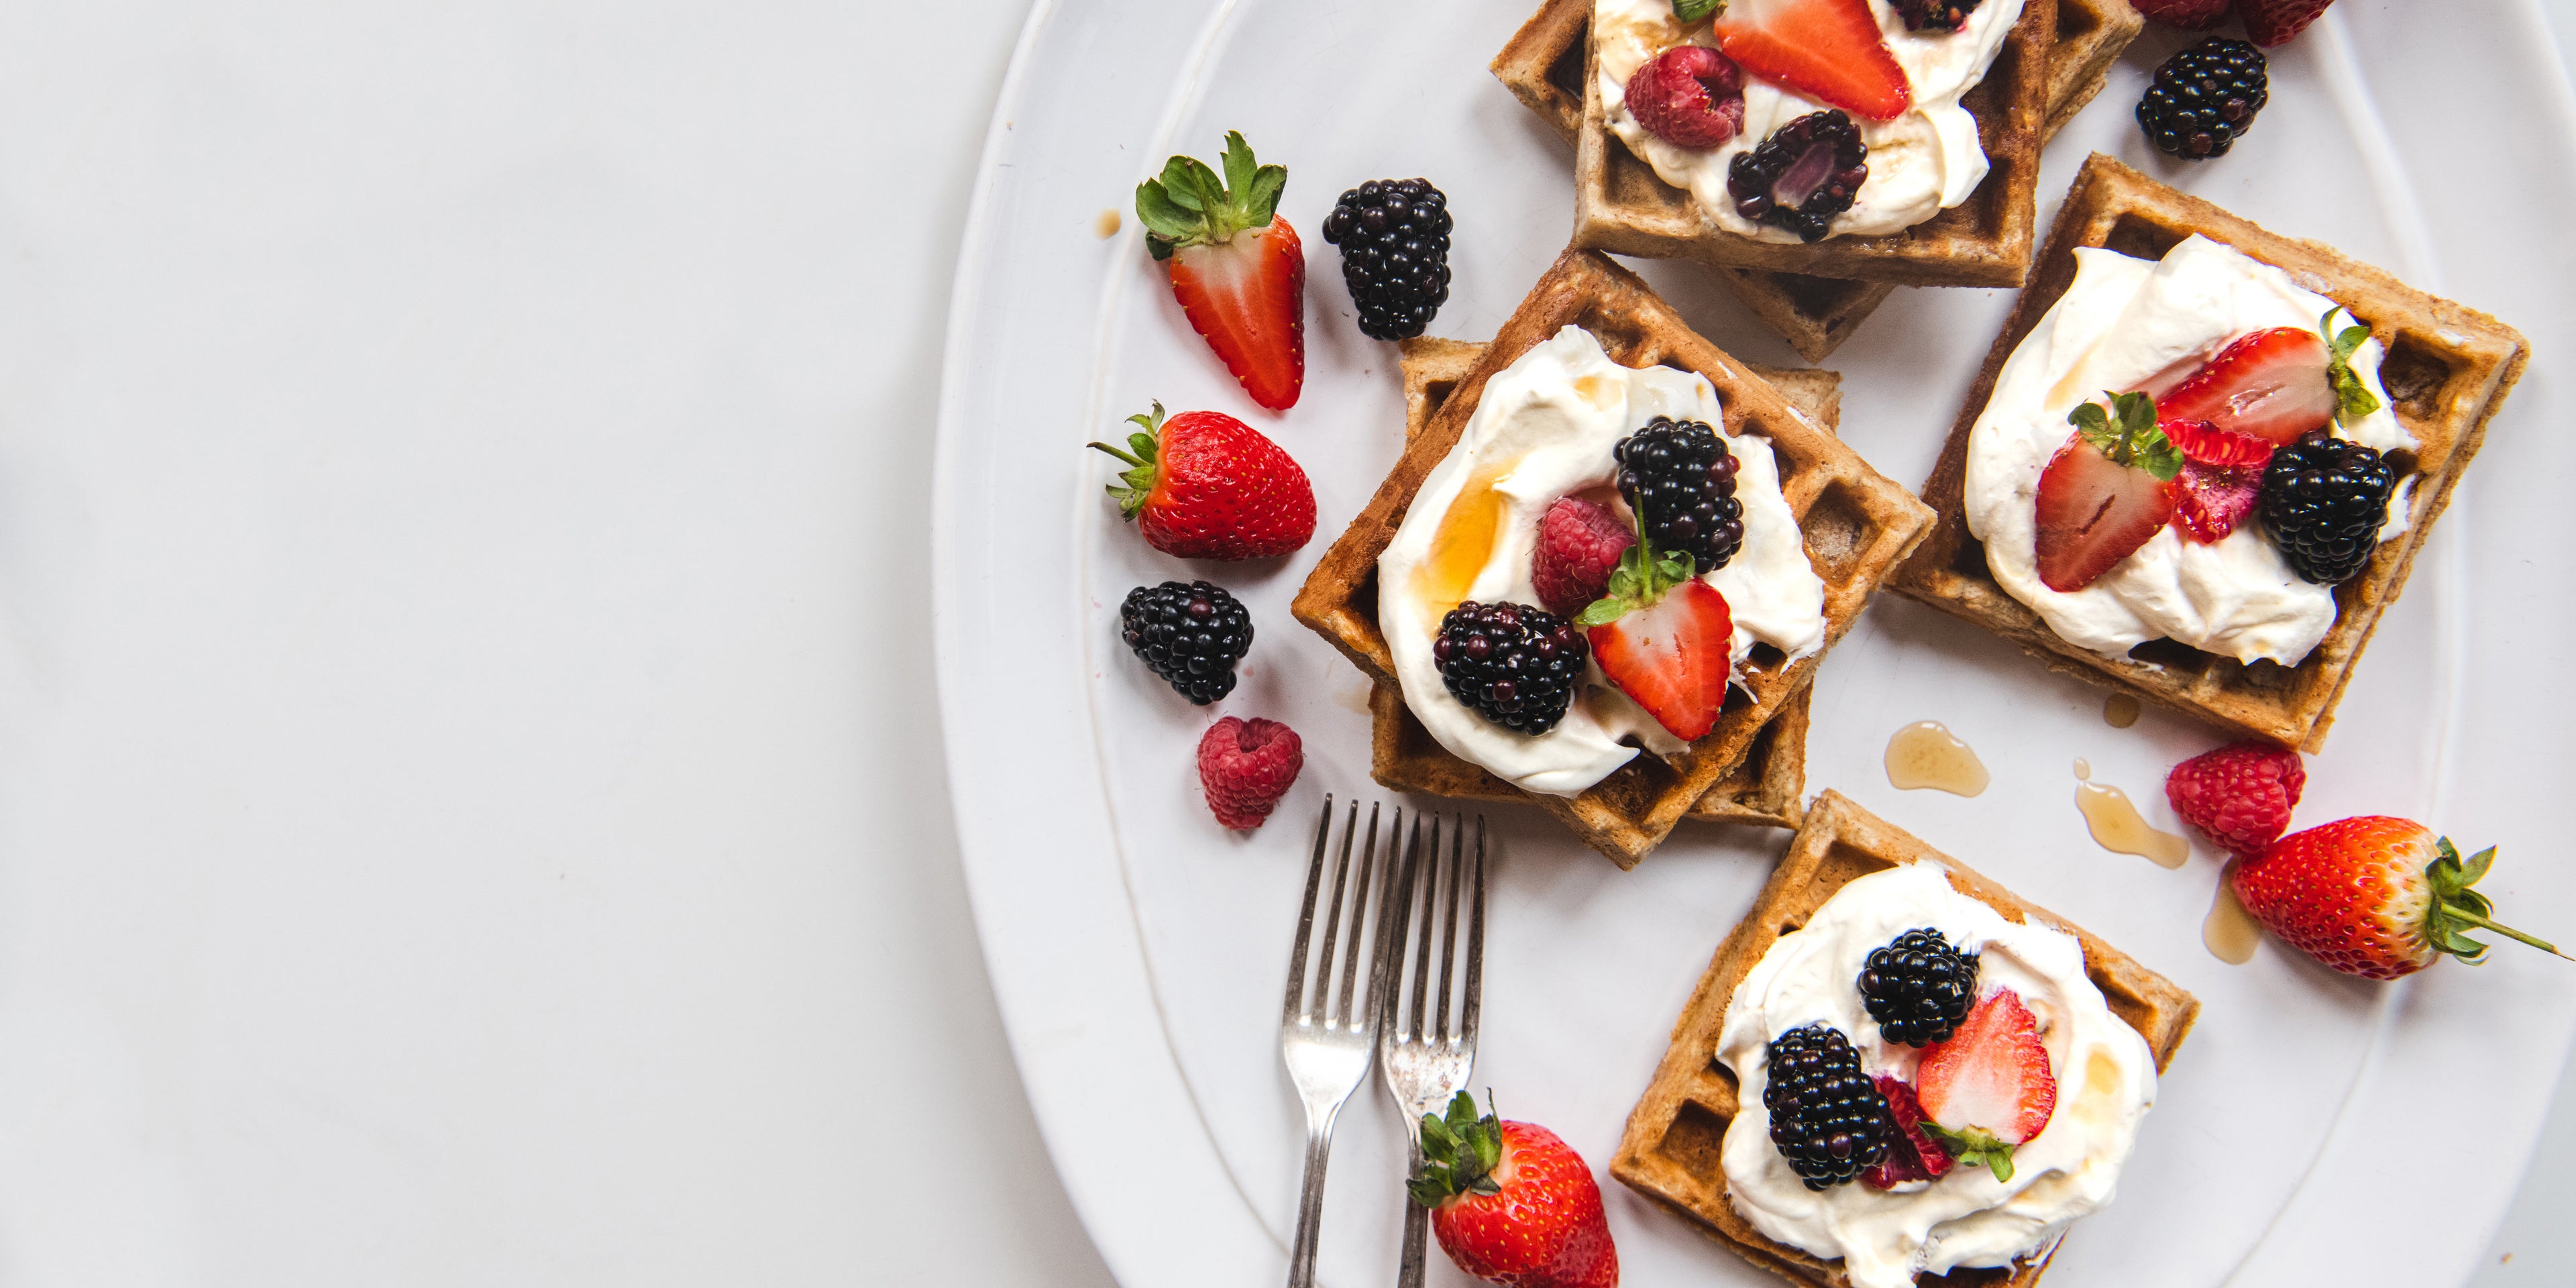 Top view of Wholemeal Banana Waffles topped with cream and fresh berries